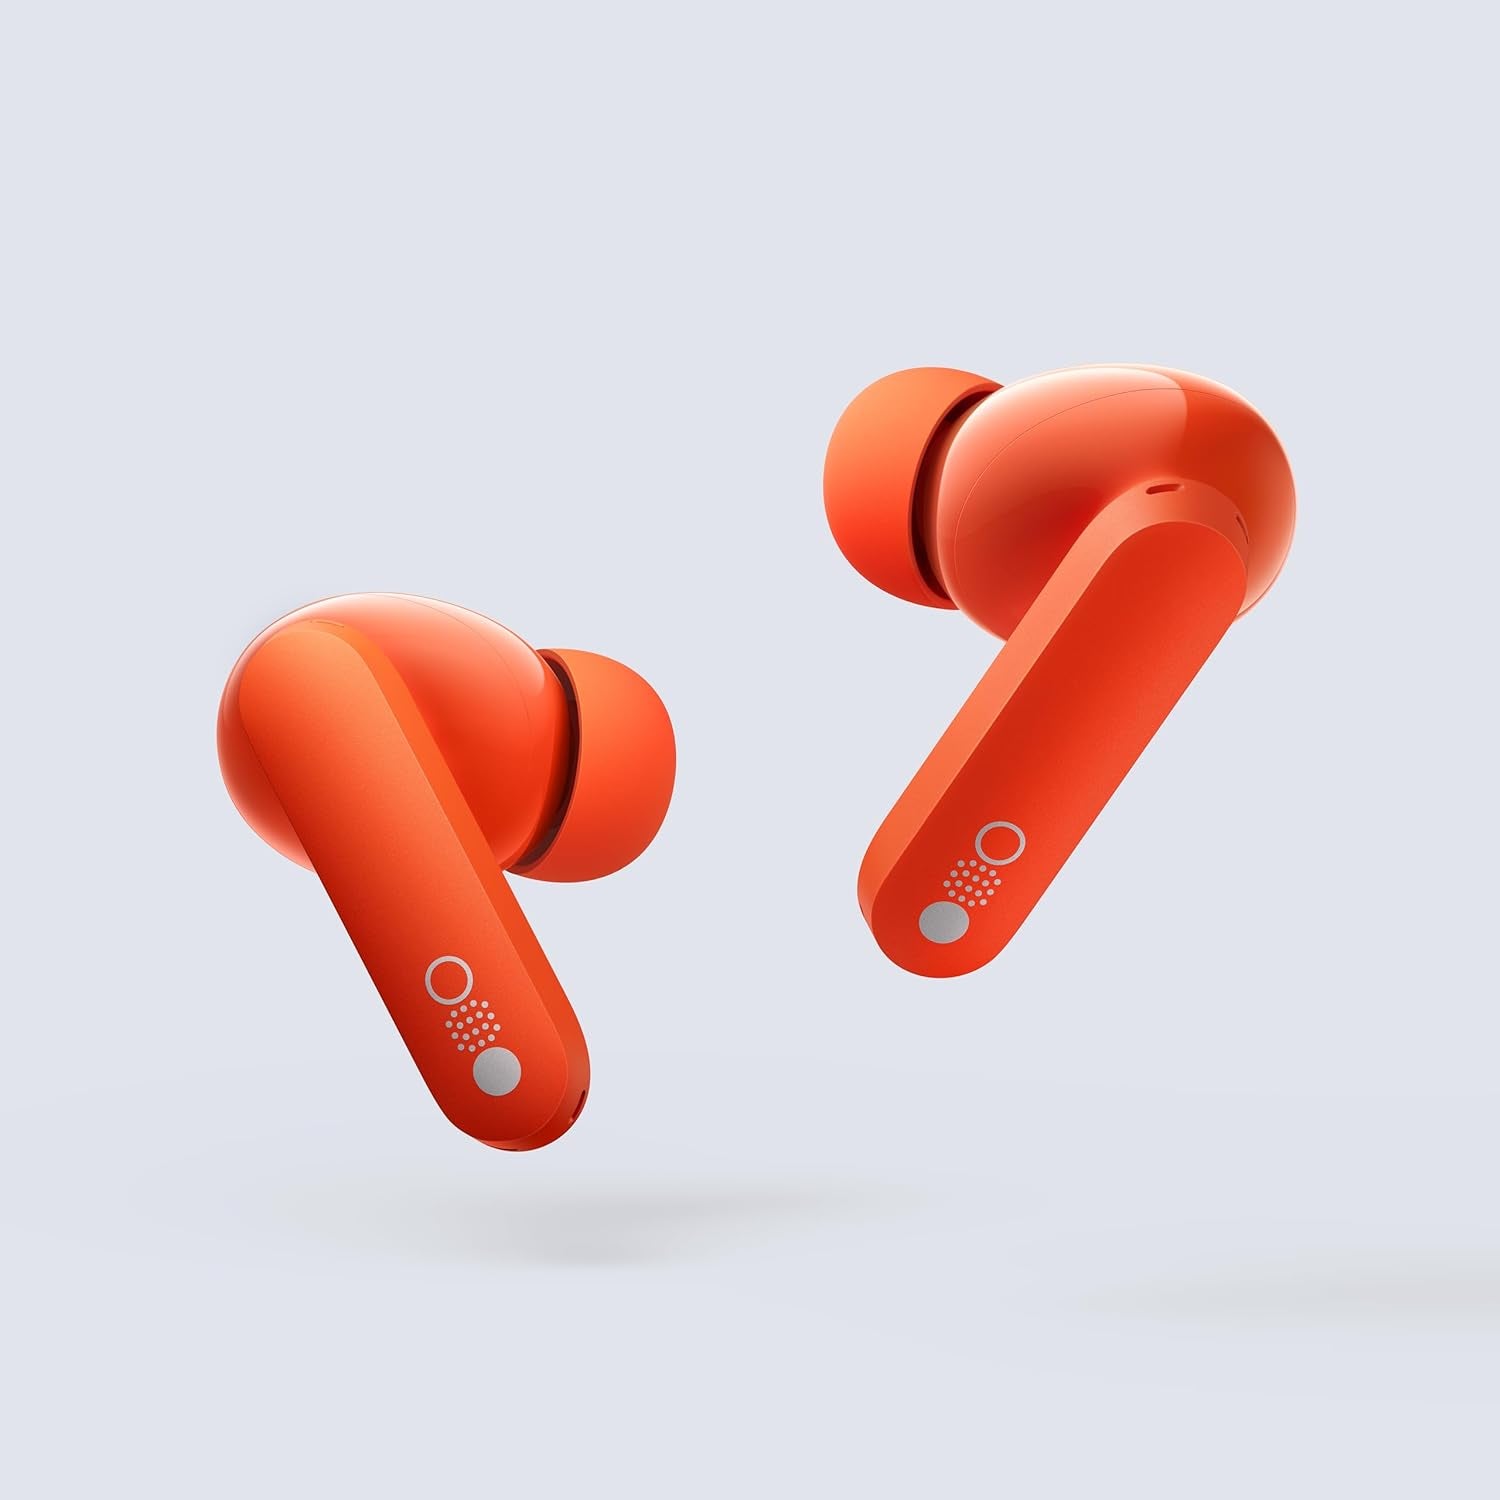 Buds Pro Wireless Earbuds,Active Noise Cancellation to 45 Db,39H Playtime IP54 Waterproof Dynamic Bass Earphones,Bluetooth 5.3 in Headphones for Iphone & Android (Orange)